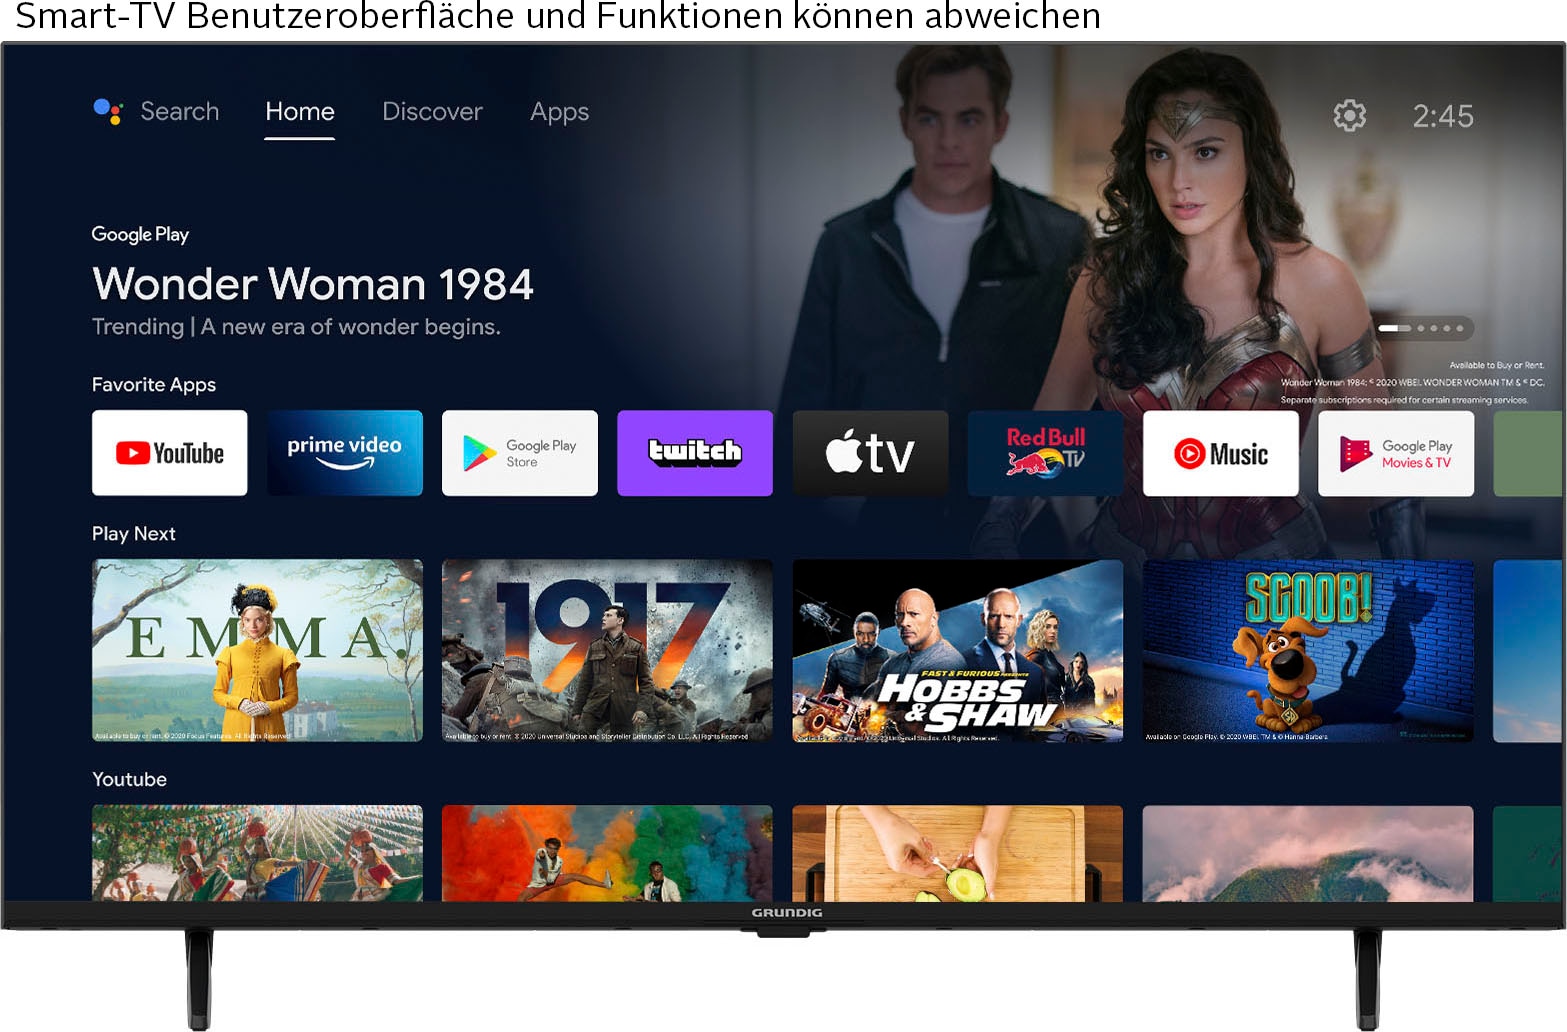 LED-Fernseher »32 VOE 631 BR2T00«, 80 cm/32 Zoll, HD ready, Android TV-Smart-TV